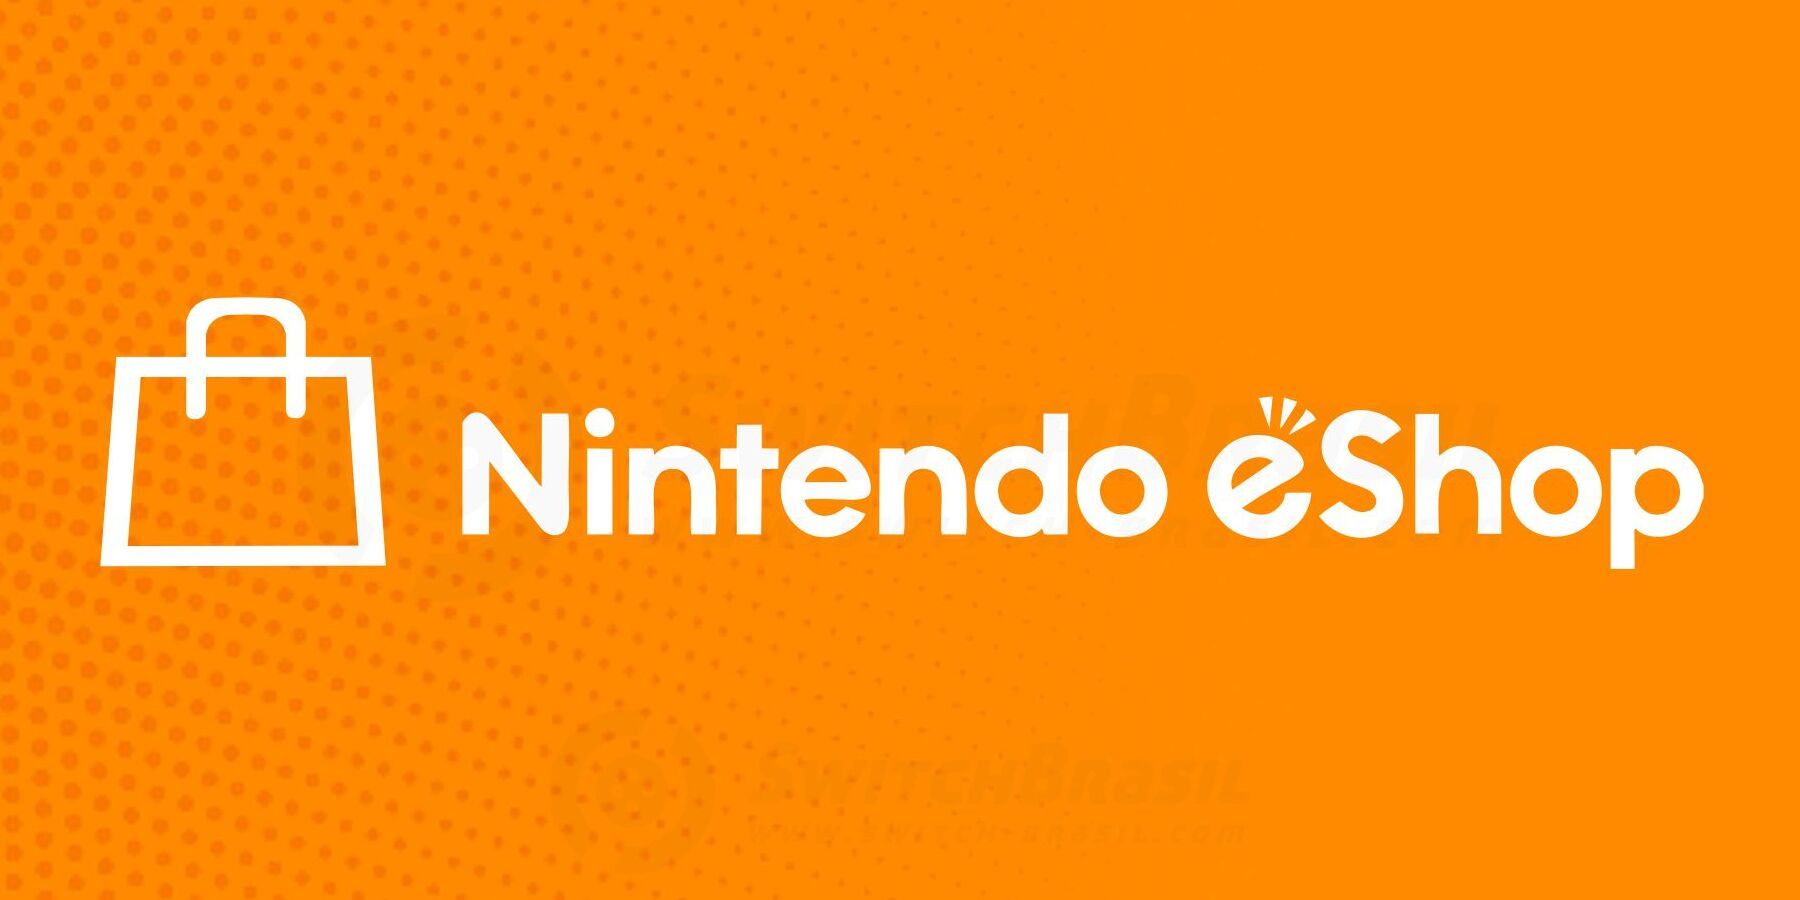 Nintendo Switch Game Removed from eShop